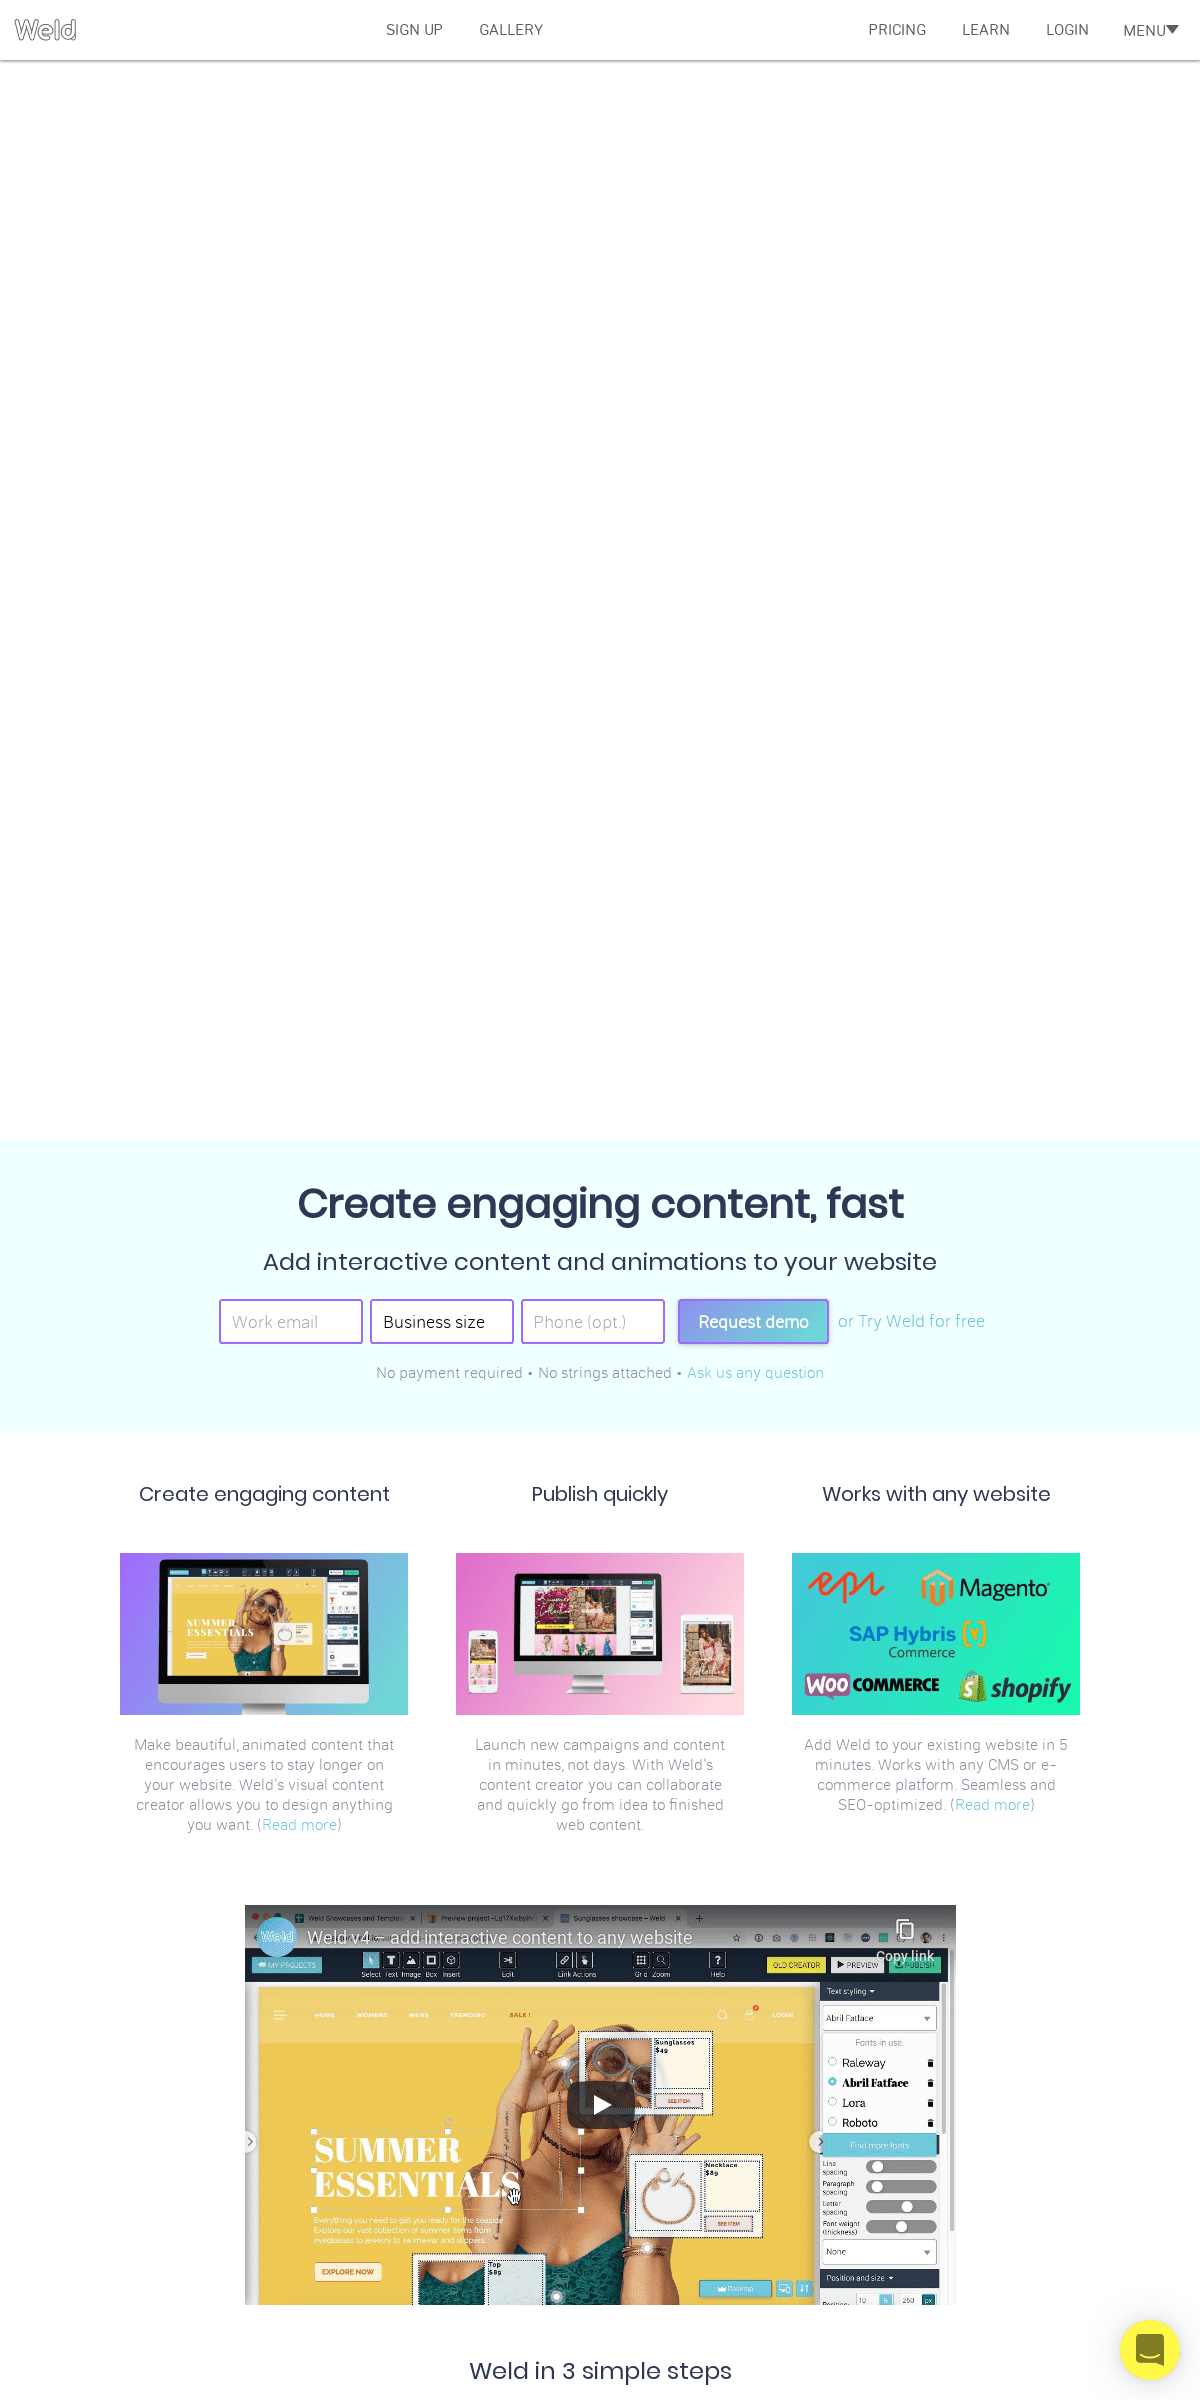 Weld â€“ Create engaging content â€“ Interactive content and animations